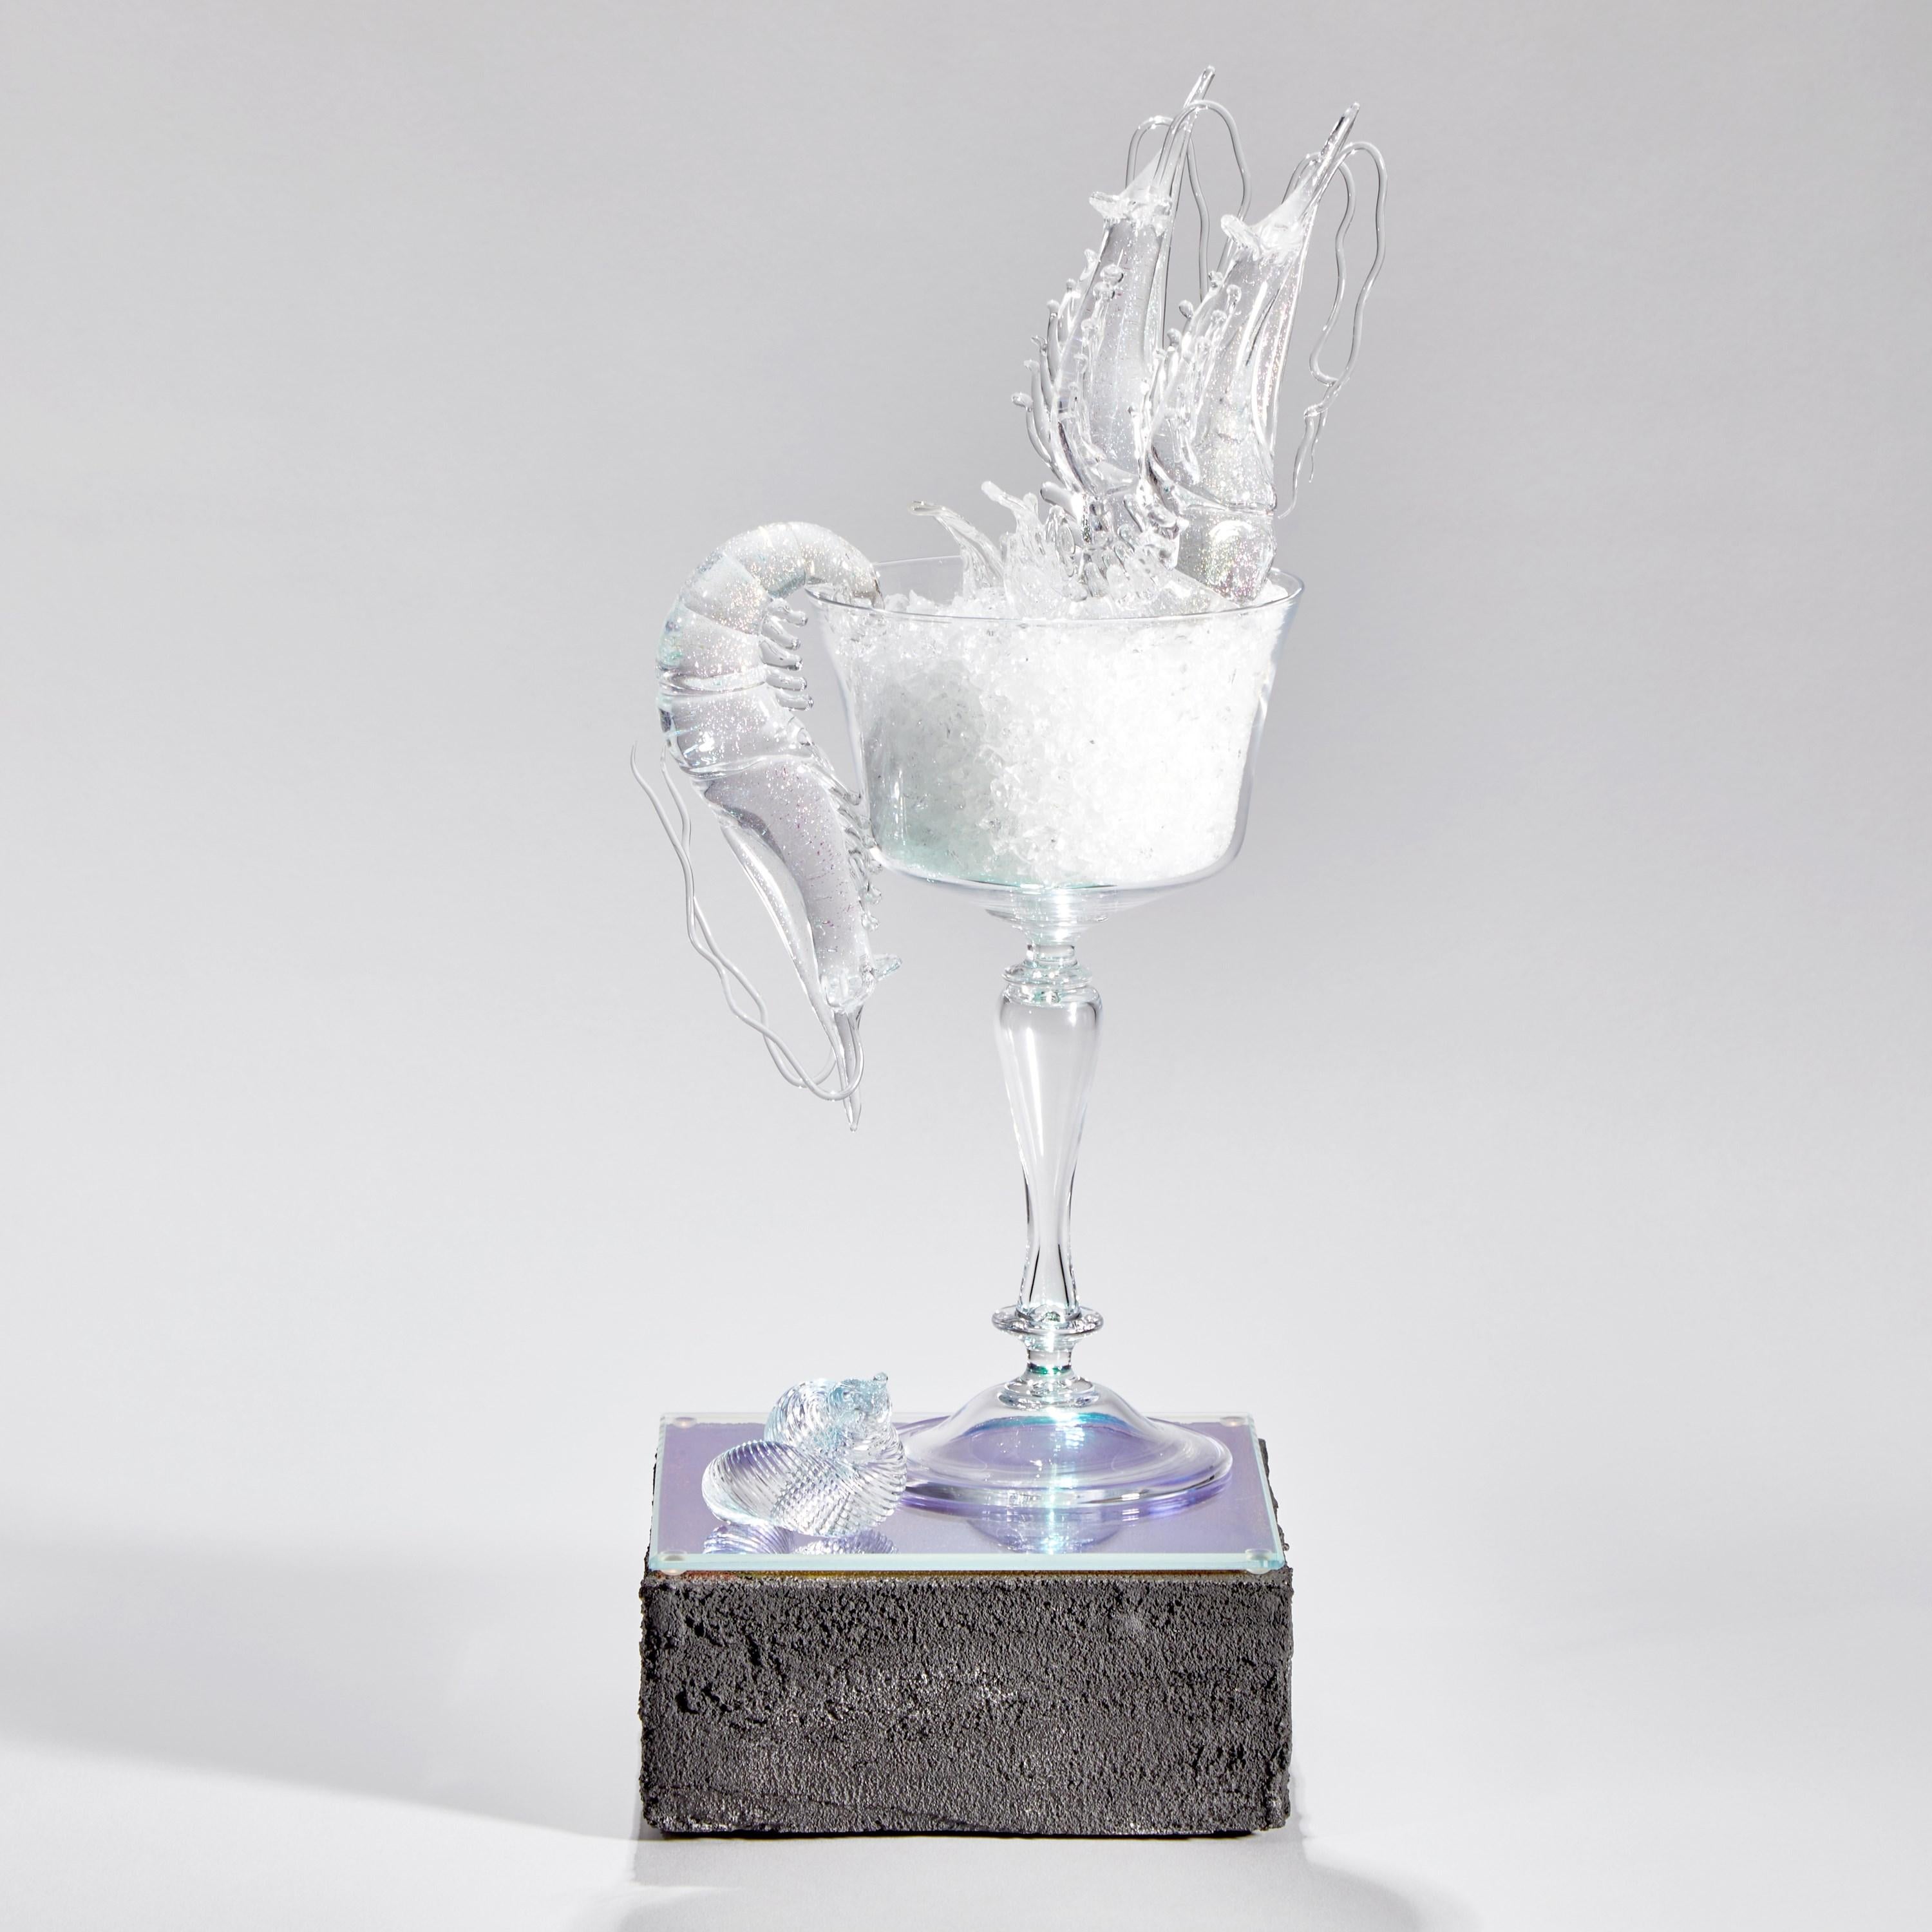 'Surf - Still Life with Shrimp' is from the British artist and Blown Away II series winner, Elliot Walker's ongoing body of unique still life artworks. Freehand sculpted in clear glass with iridescent detail, the piece incorporates goblet filled